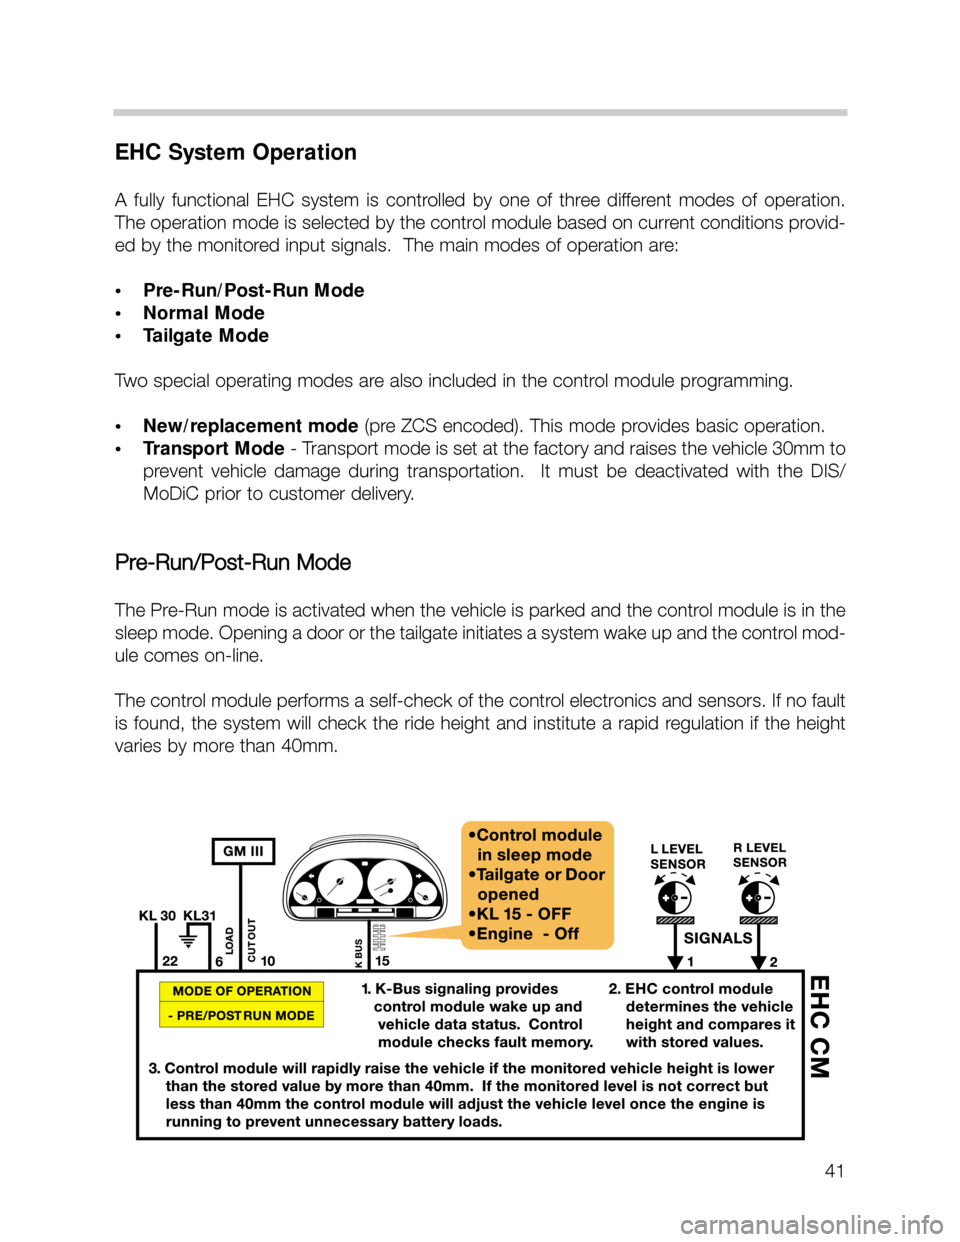 BMW X5 2006 E53 Workshop Manual 41
EHC System Operation
A  fully  functional  EHC  system  is  controlled  by  one  of  three  different  modes  of  operation.
The operation mode is selected by the control module based on current co